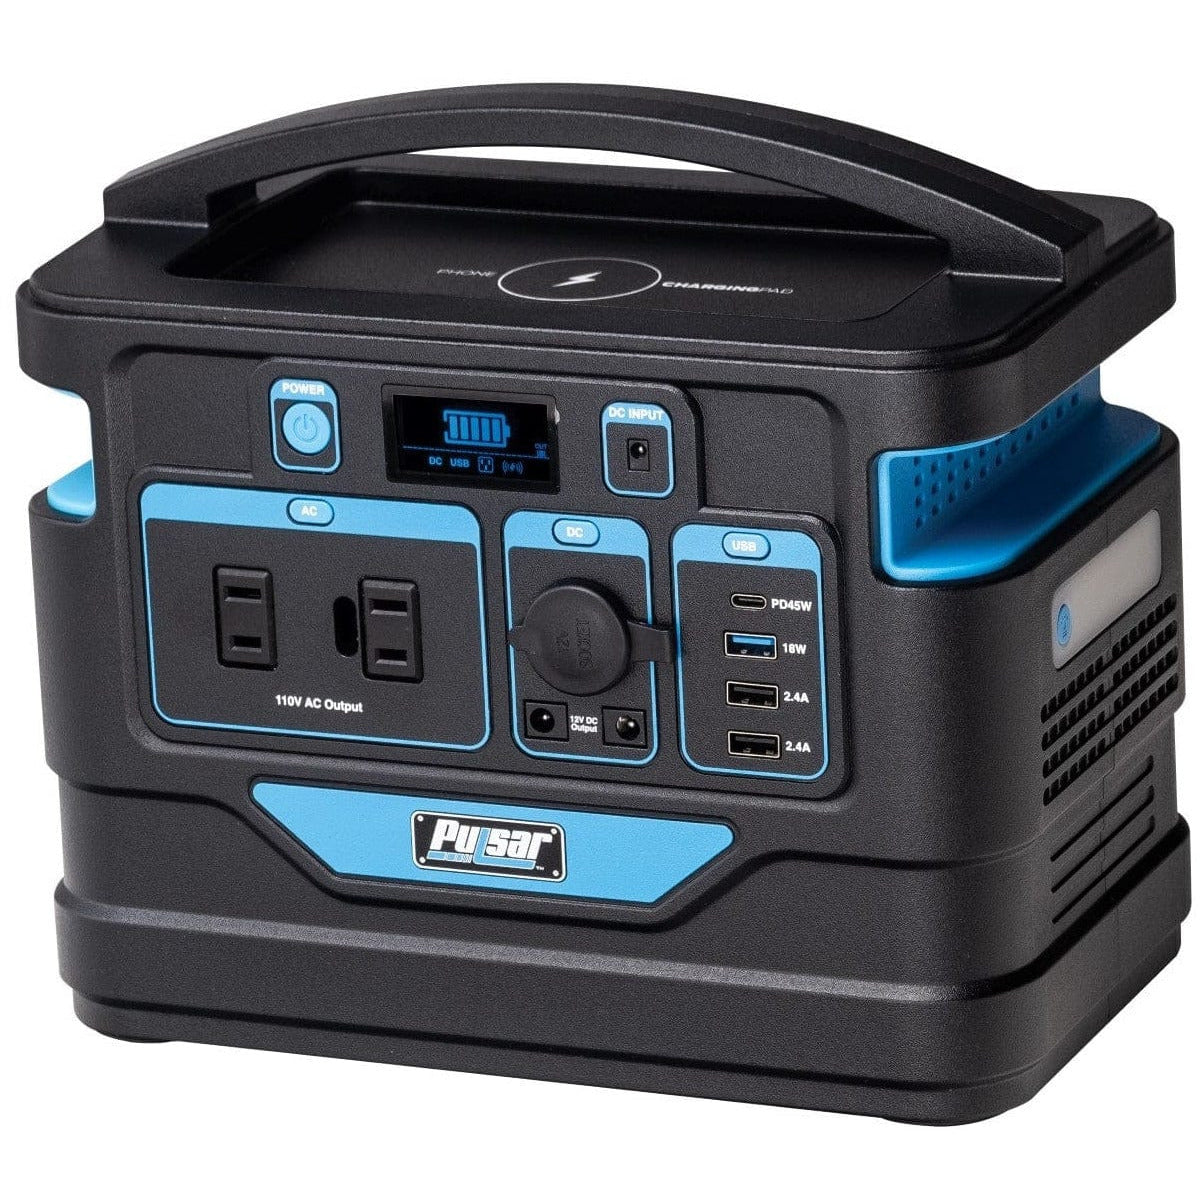 Pulsar PPS500 518Wh Portable Power Station